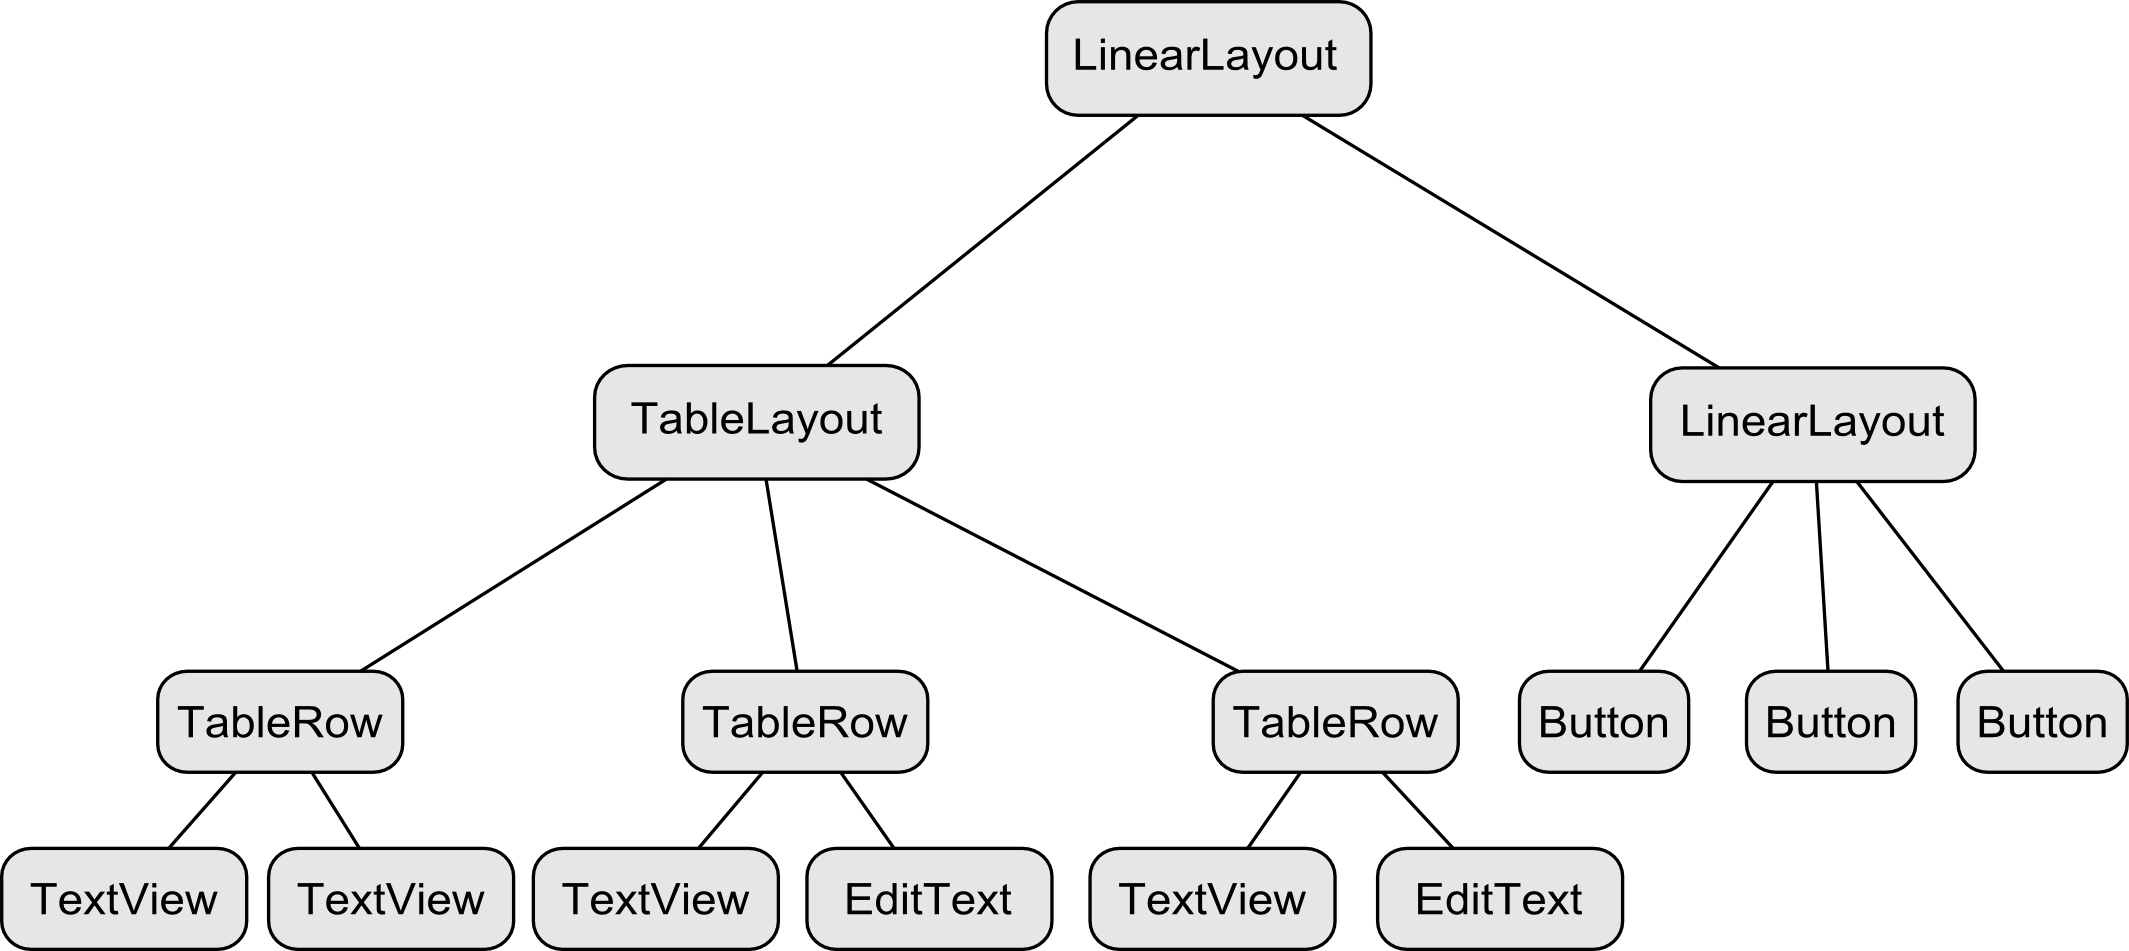 The hierarchy of an example TableLayout implementation